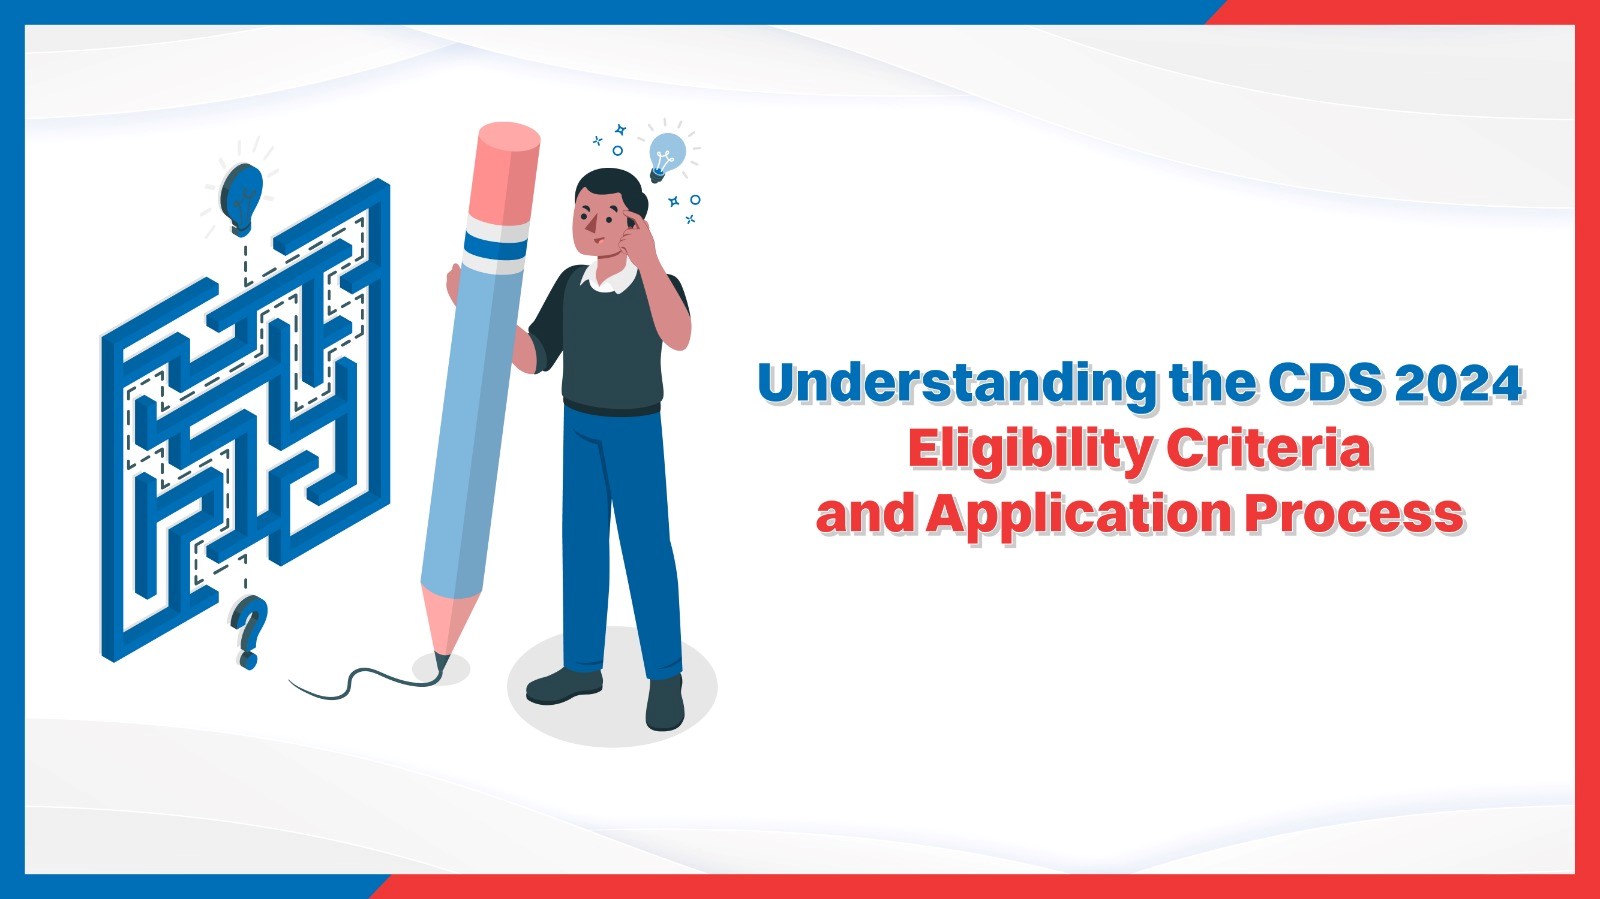 Understanding the CDS 2024 Eligibility Criteria and Application Process